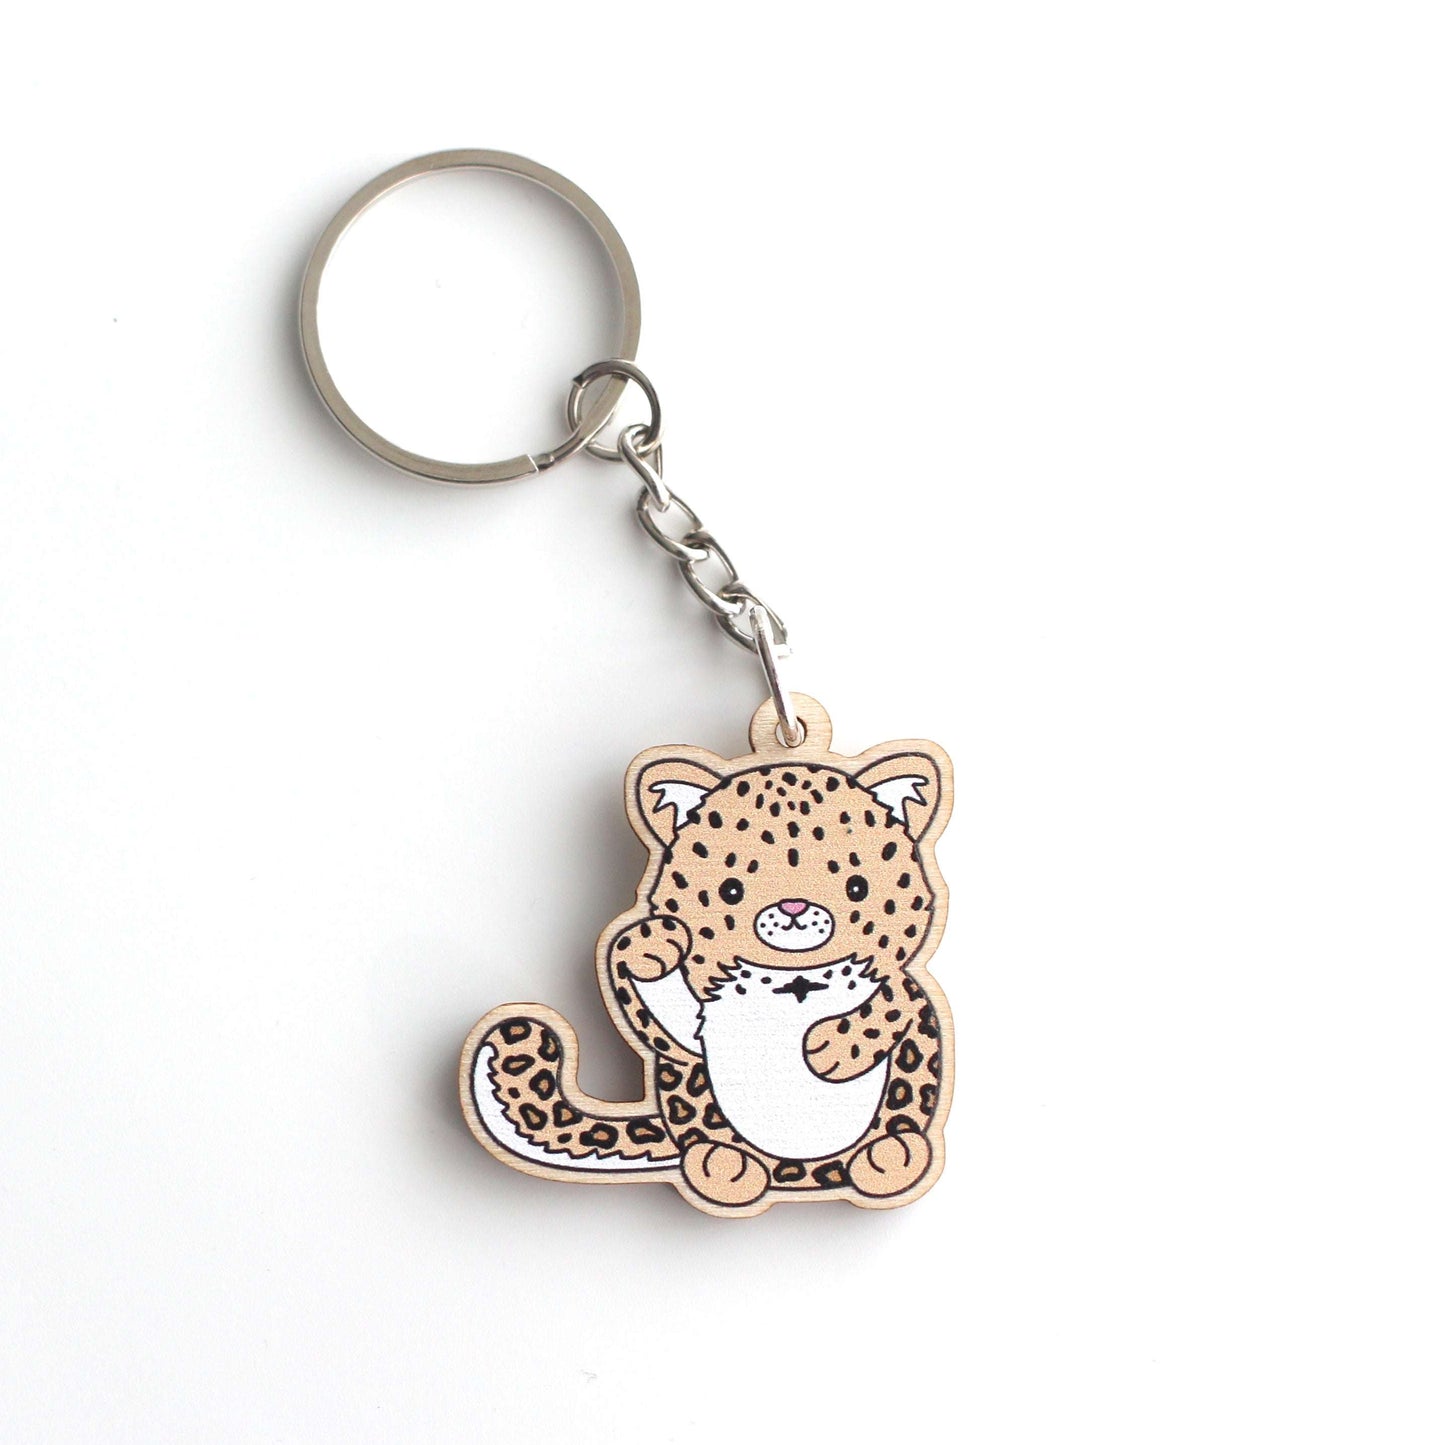 Lucky Amur Leopard Wooden Keychain - Sustainable Gift - Panther Key Charm by Wild Whimsy Woolies